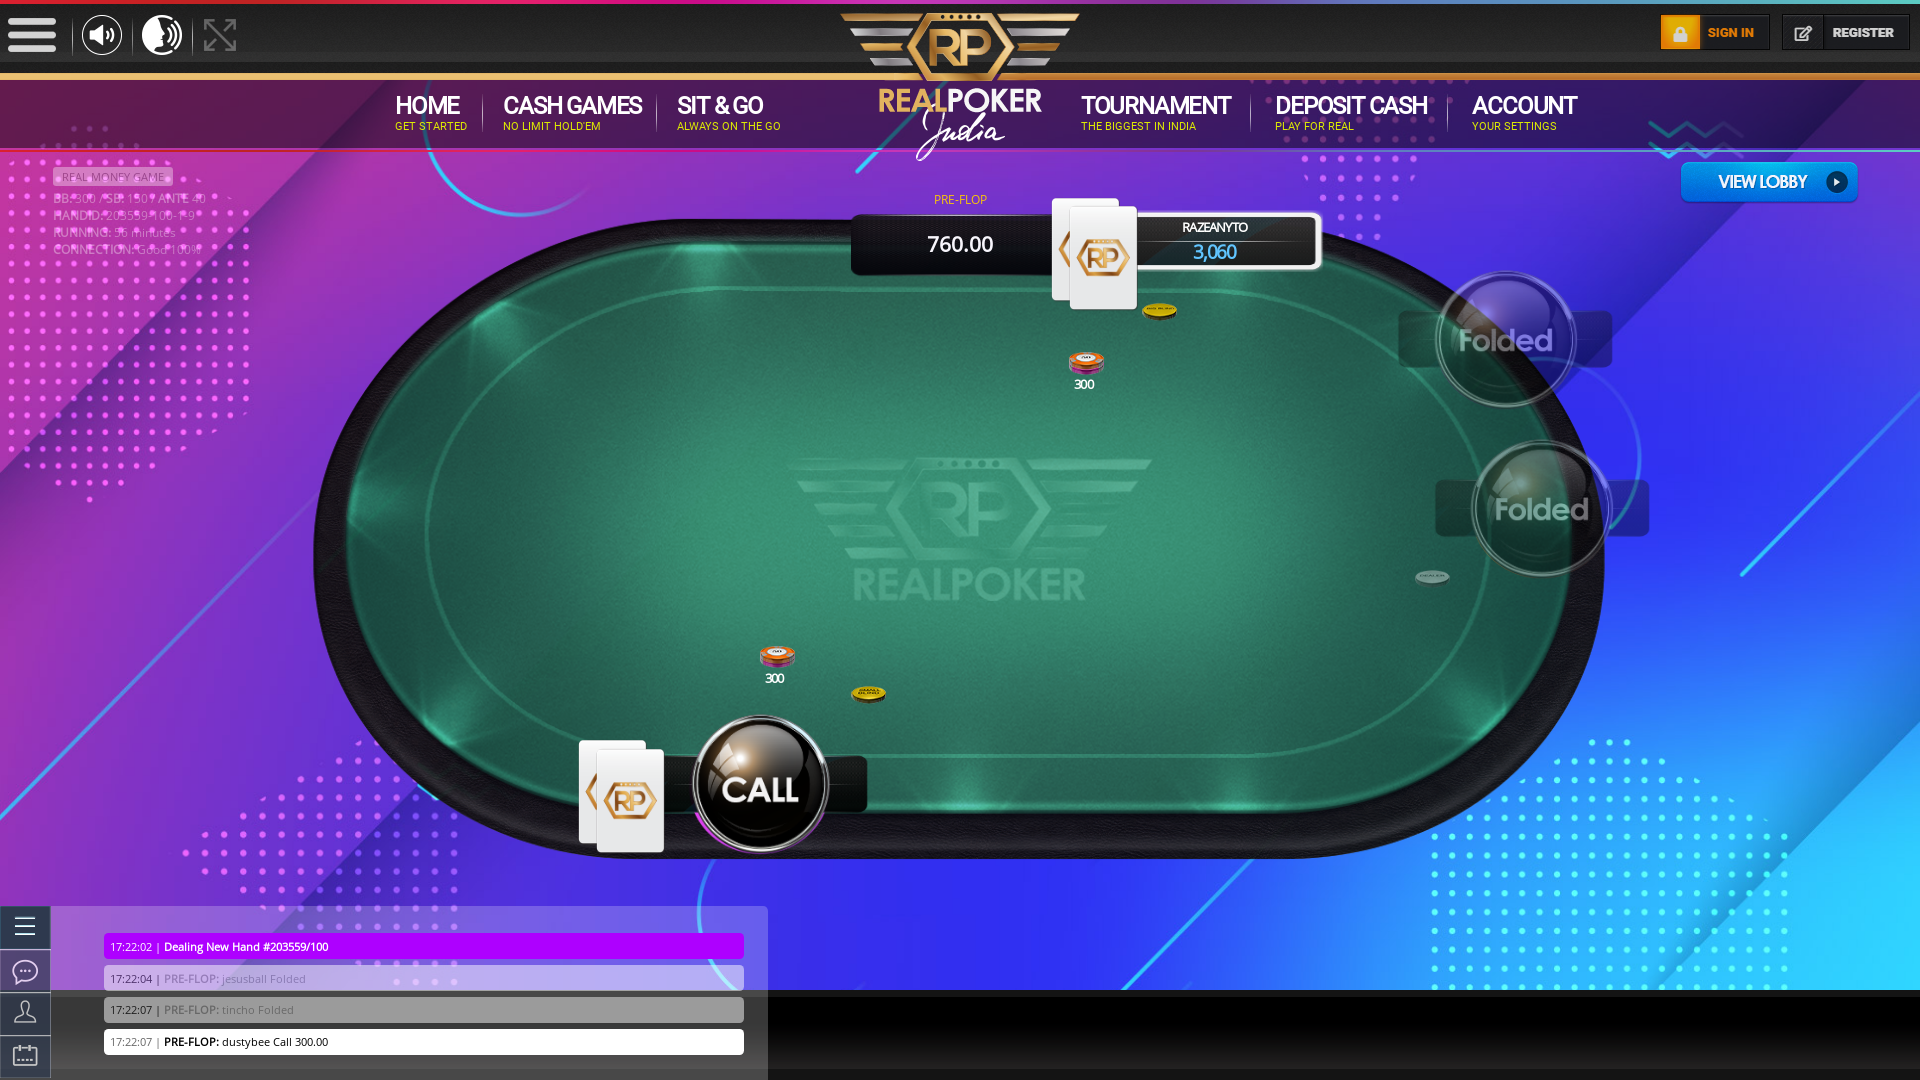 Indian online poker on a 10 player table in the 55th minute match up